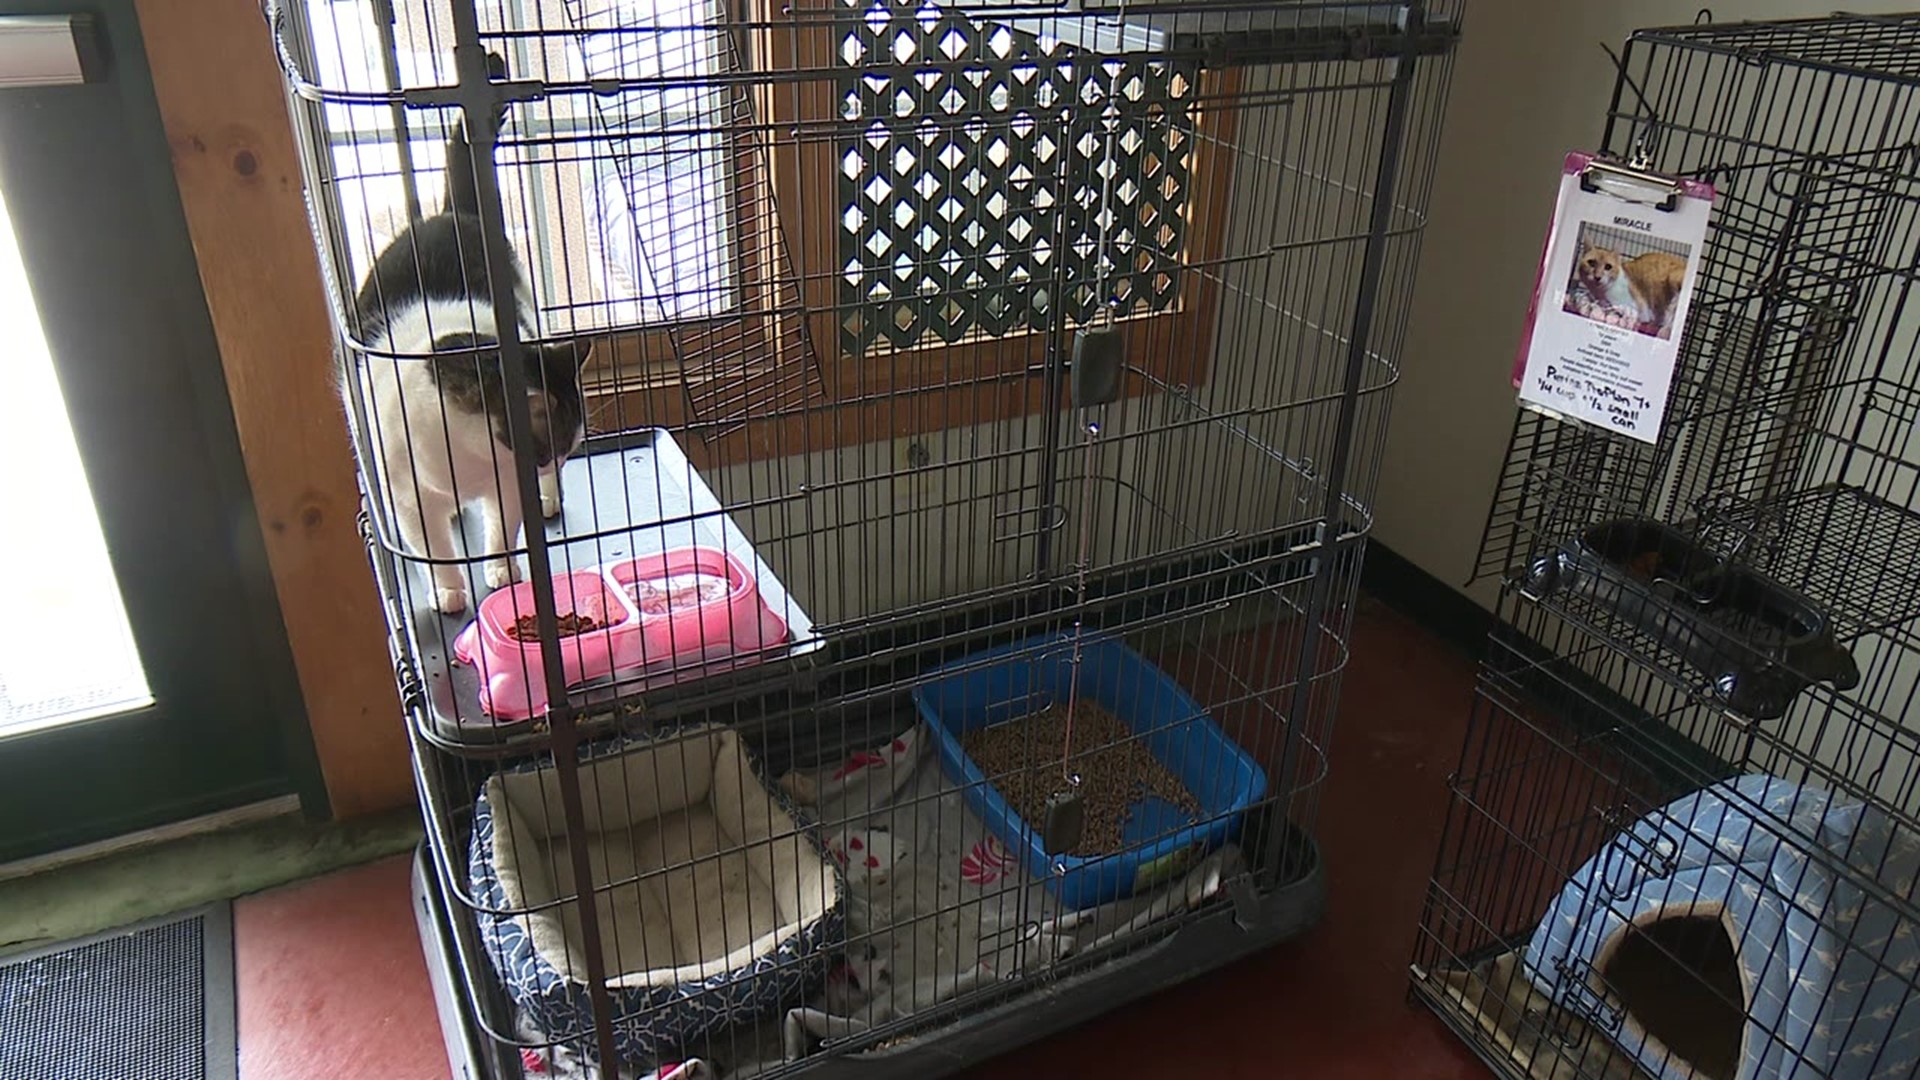 An animal shelter says it's trying to stay afloat after missing out on support from the county it thought it was entitled to.